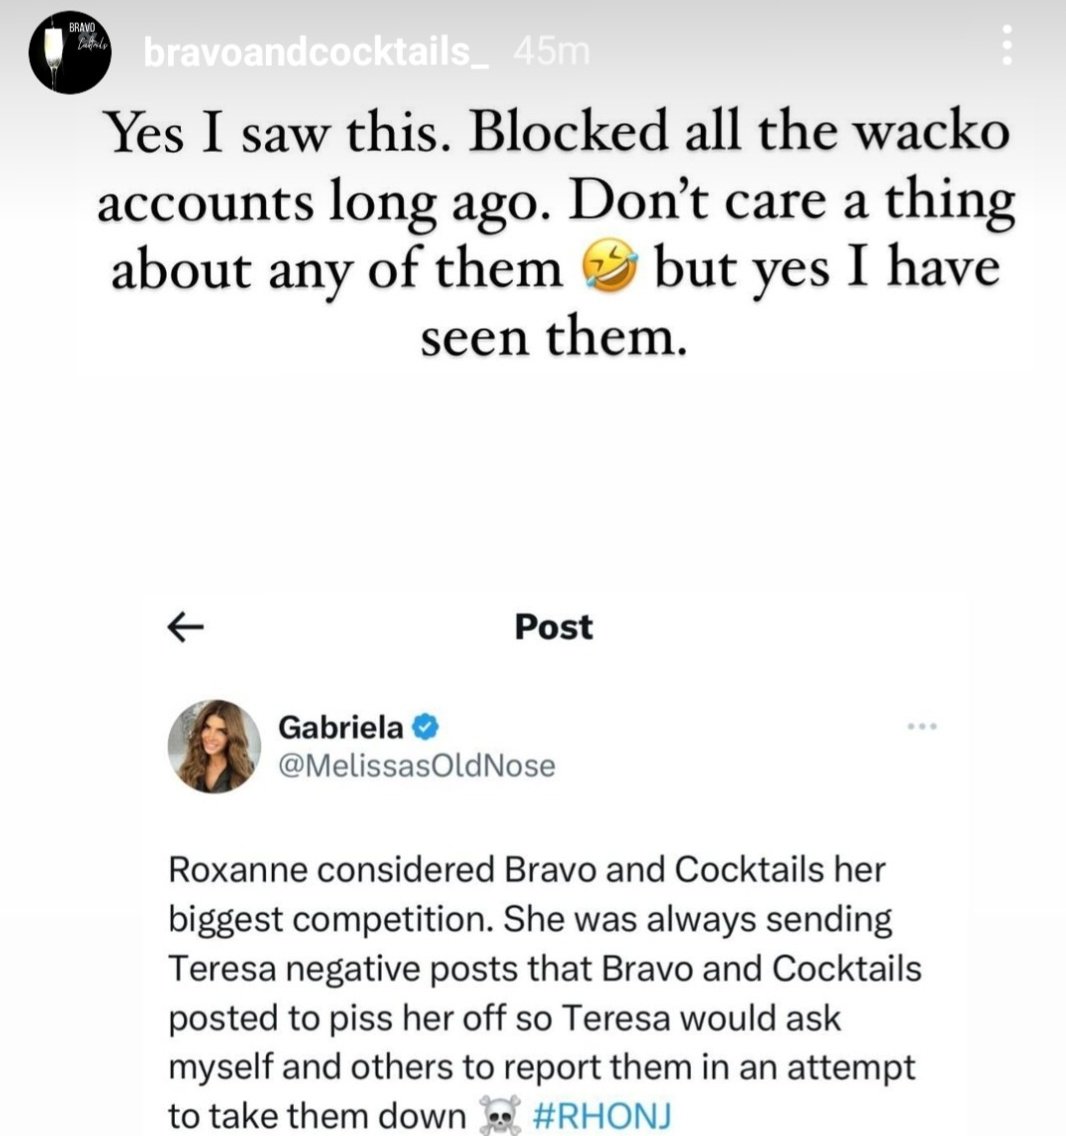 Not bravo and cocktails calling MON a wacko account. After a) she thought she did something there trying to make it as if Roxanne is going after b&c  and b) doxxing Teresa. Girl bye! You clearly lost your marbles for what a TV show.